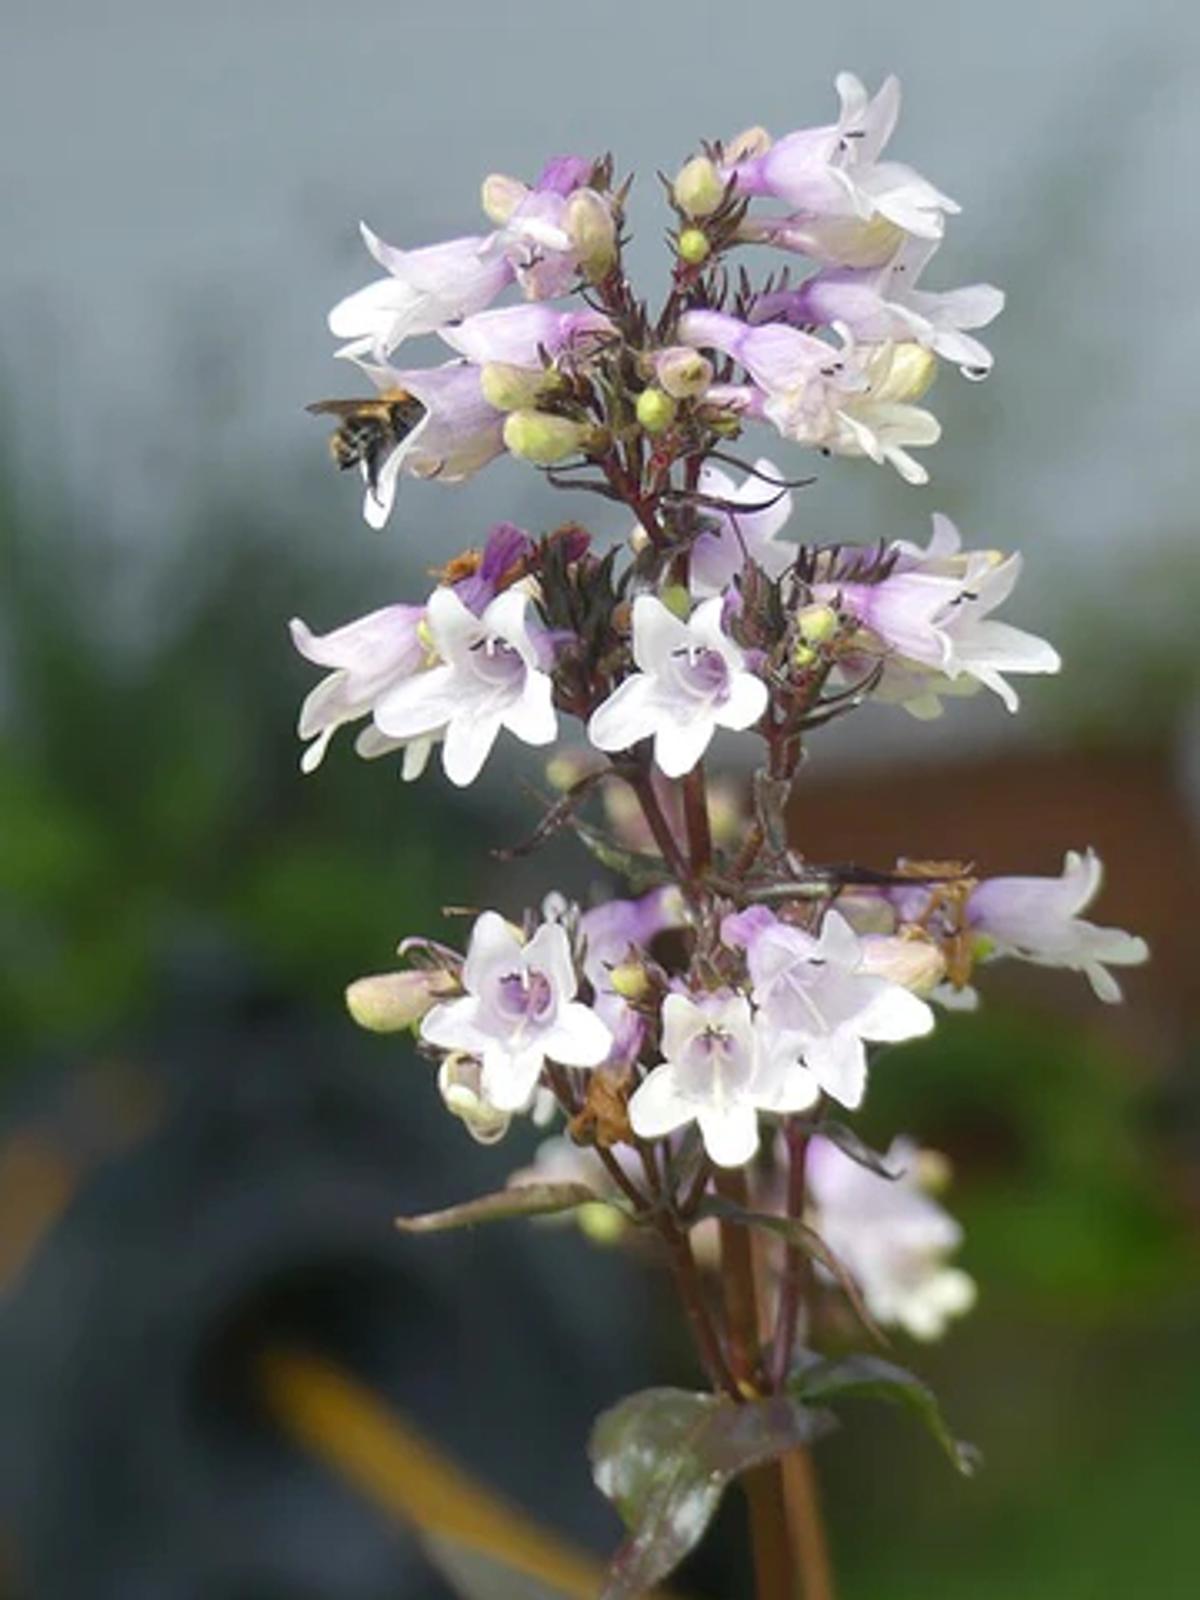 penstemon flowers with a bee